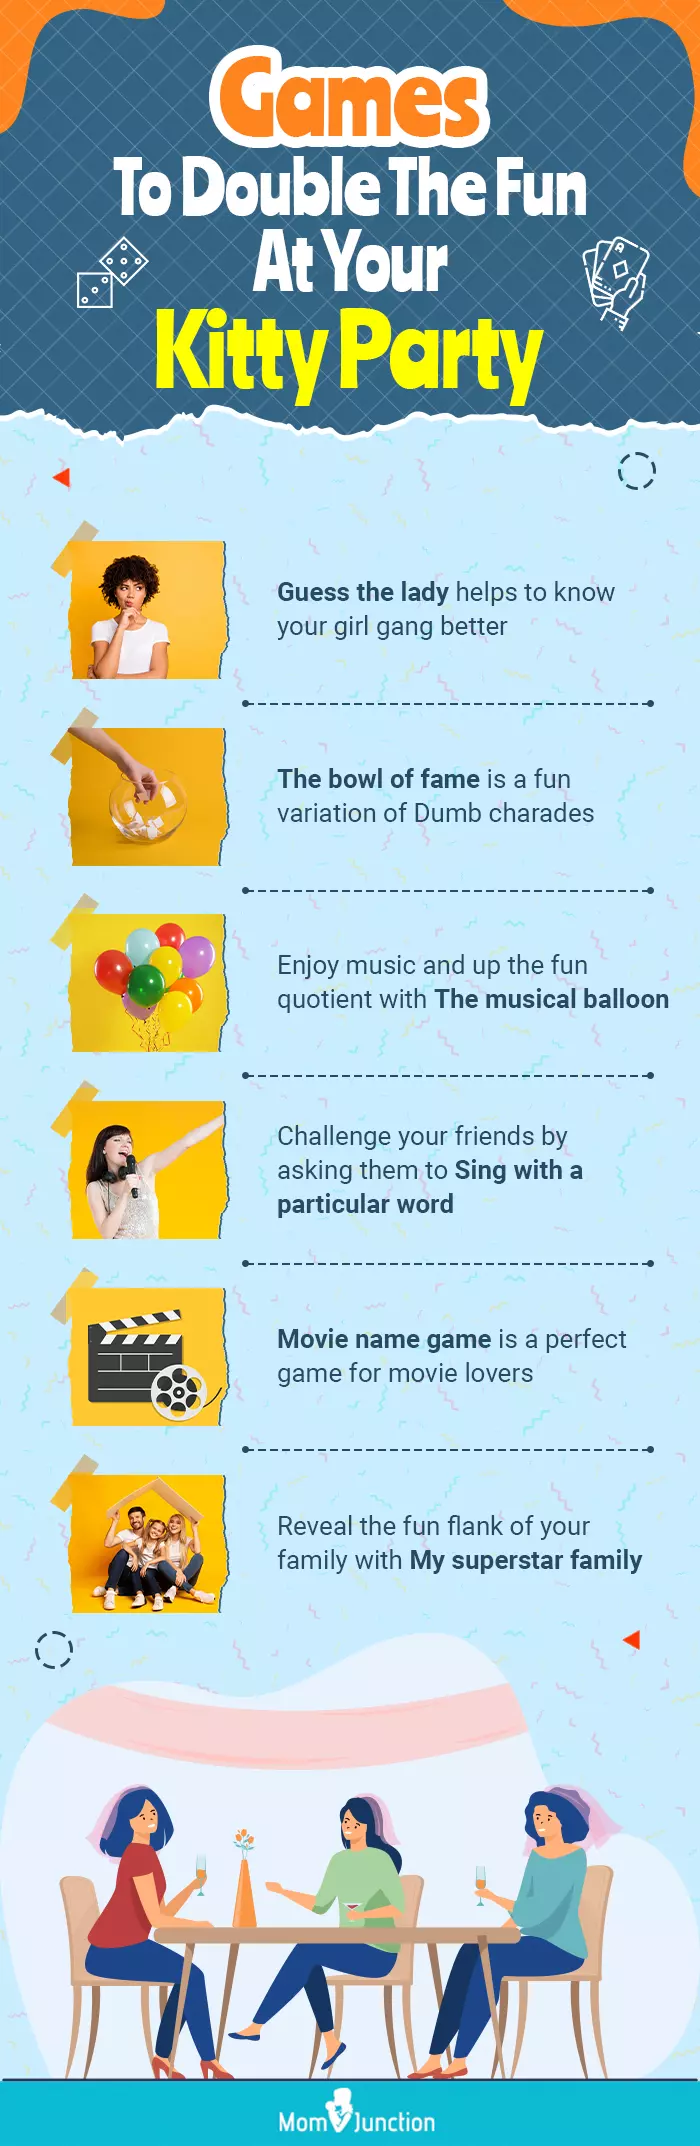 games to double the fun at your kitty party (infographic)